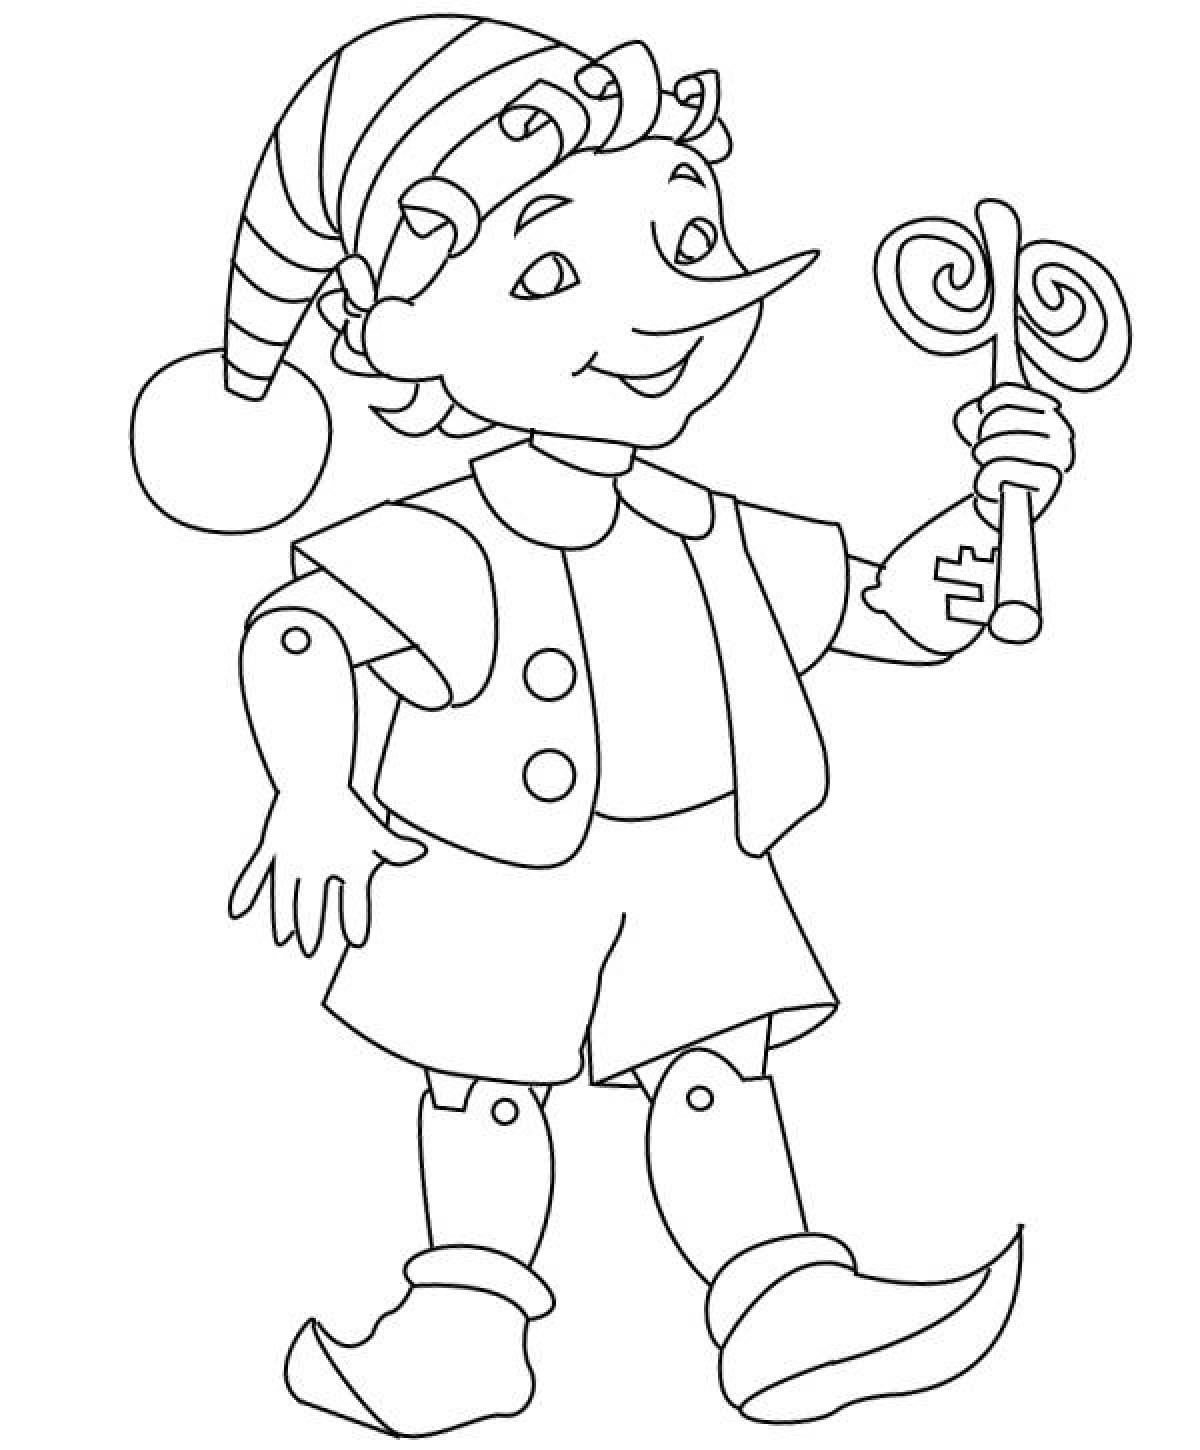 Royal coloring pages fairy tale characters